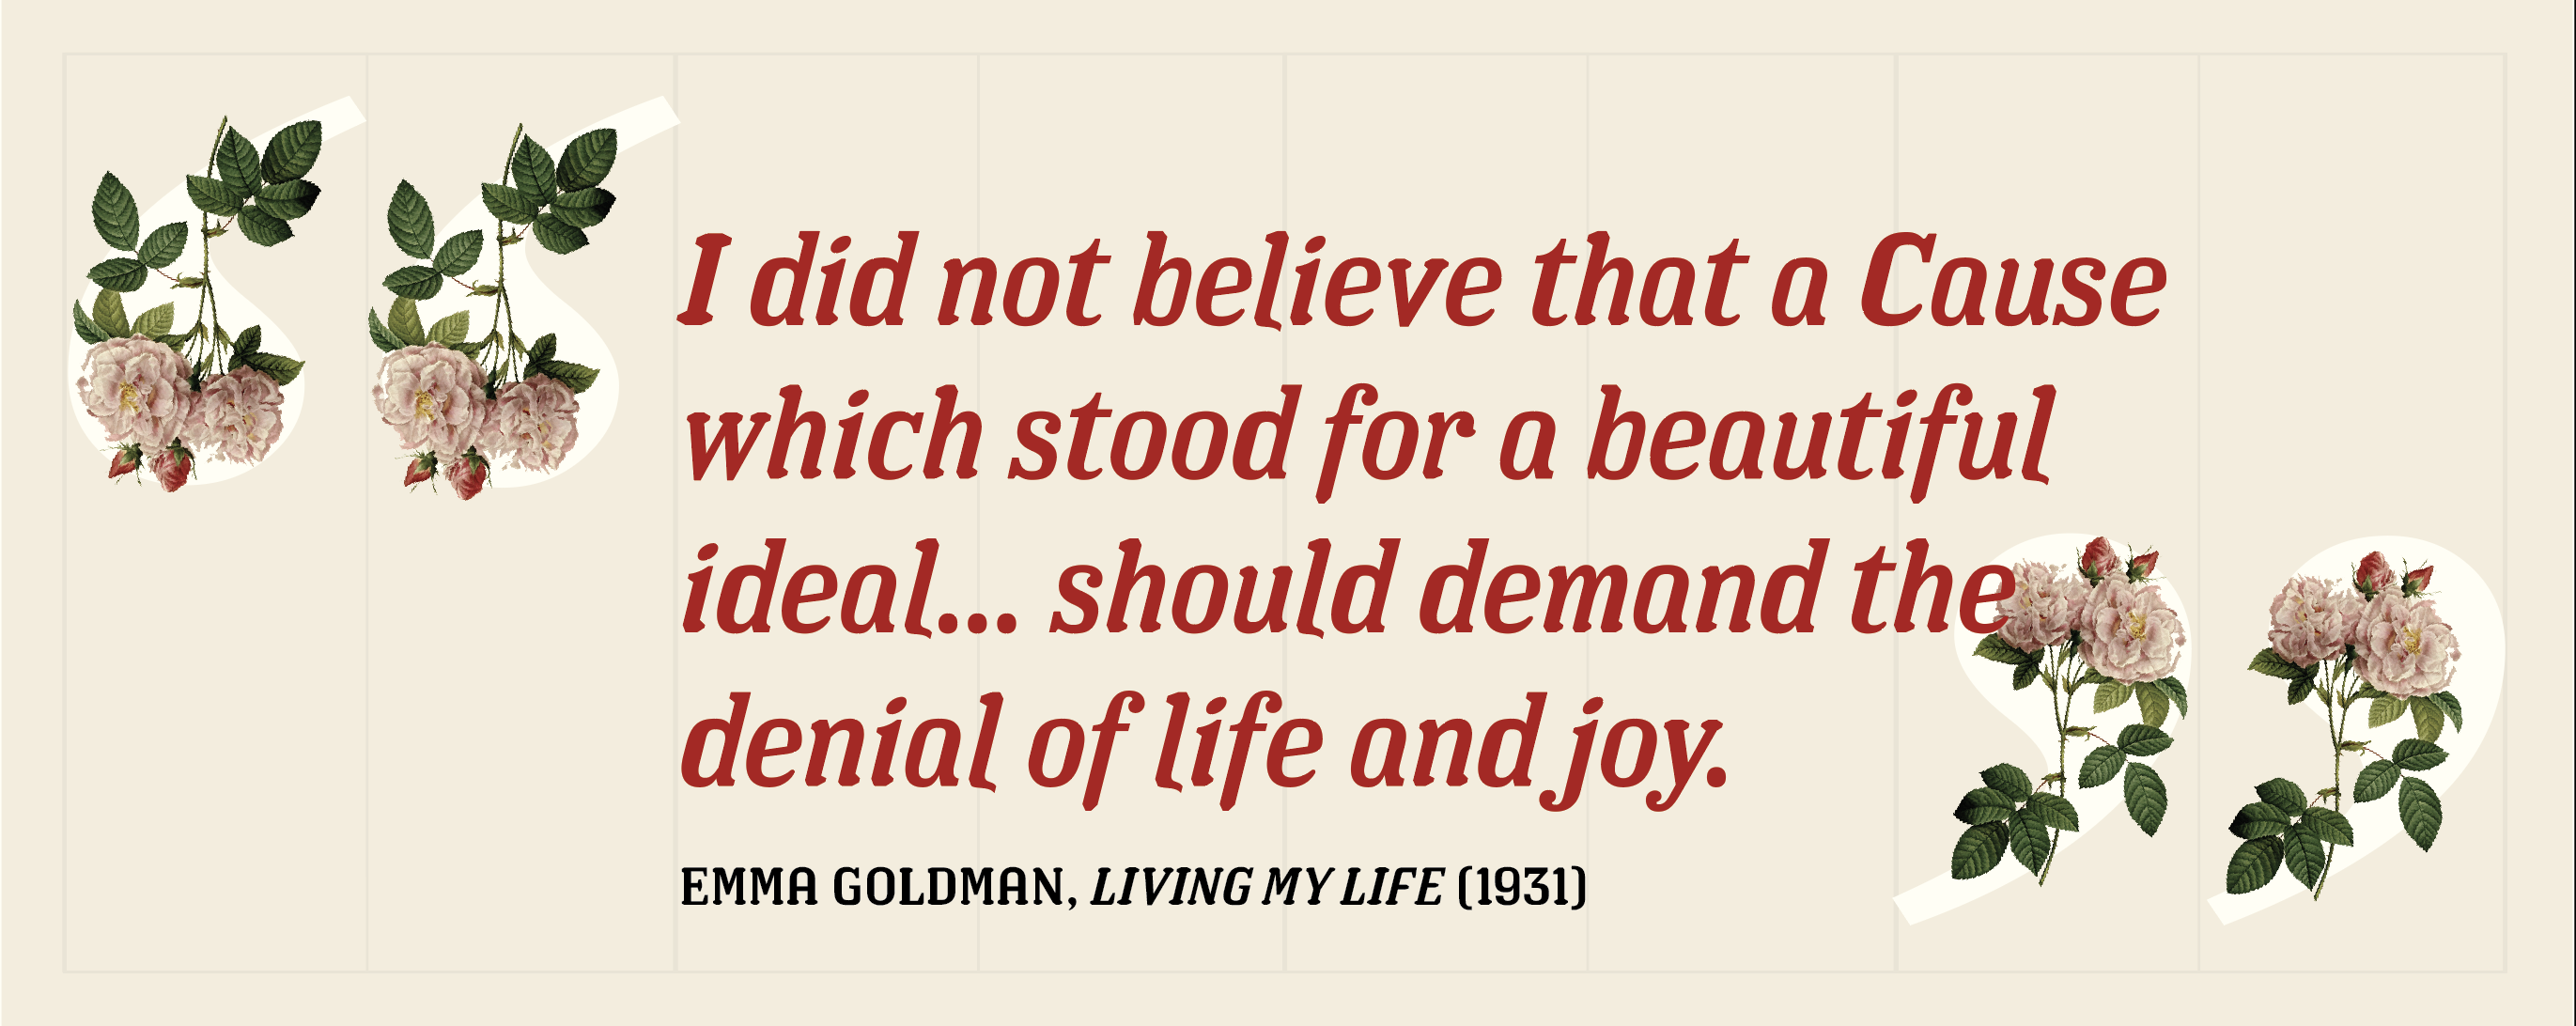 I did not believe that a Cause which stood for a beautiful ideal ... should demand the denial of life and joy